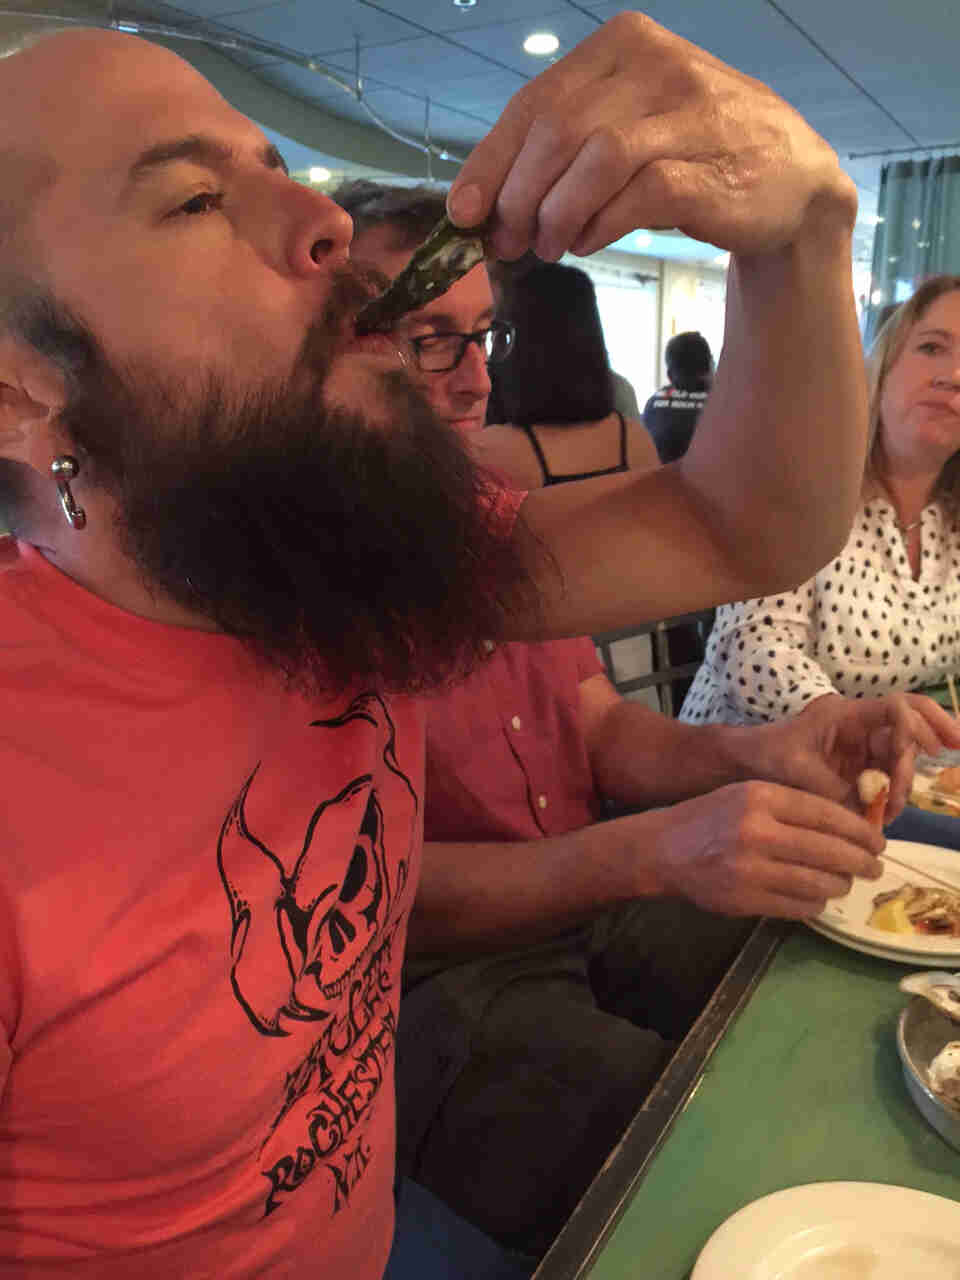 Right side view of a person sliding an oyster into their mouth from the shell, with people sitting behind them watching